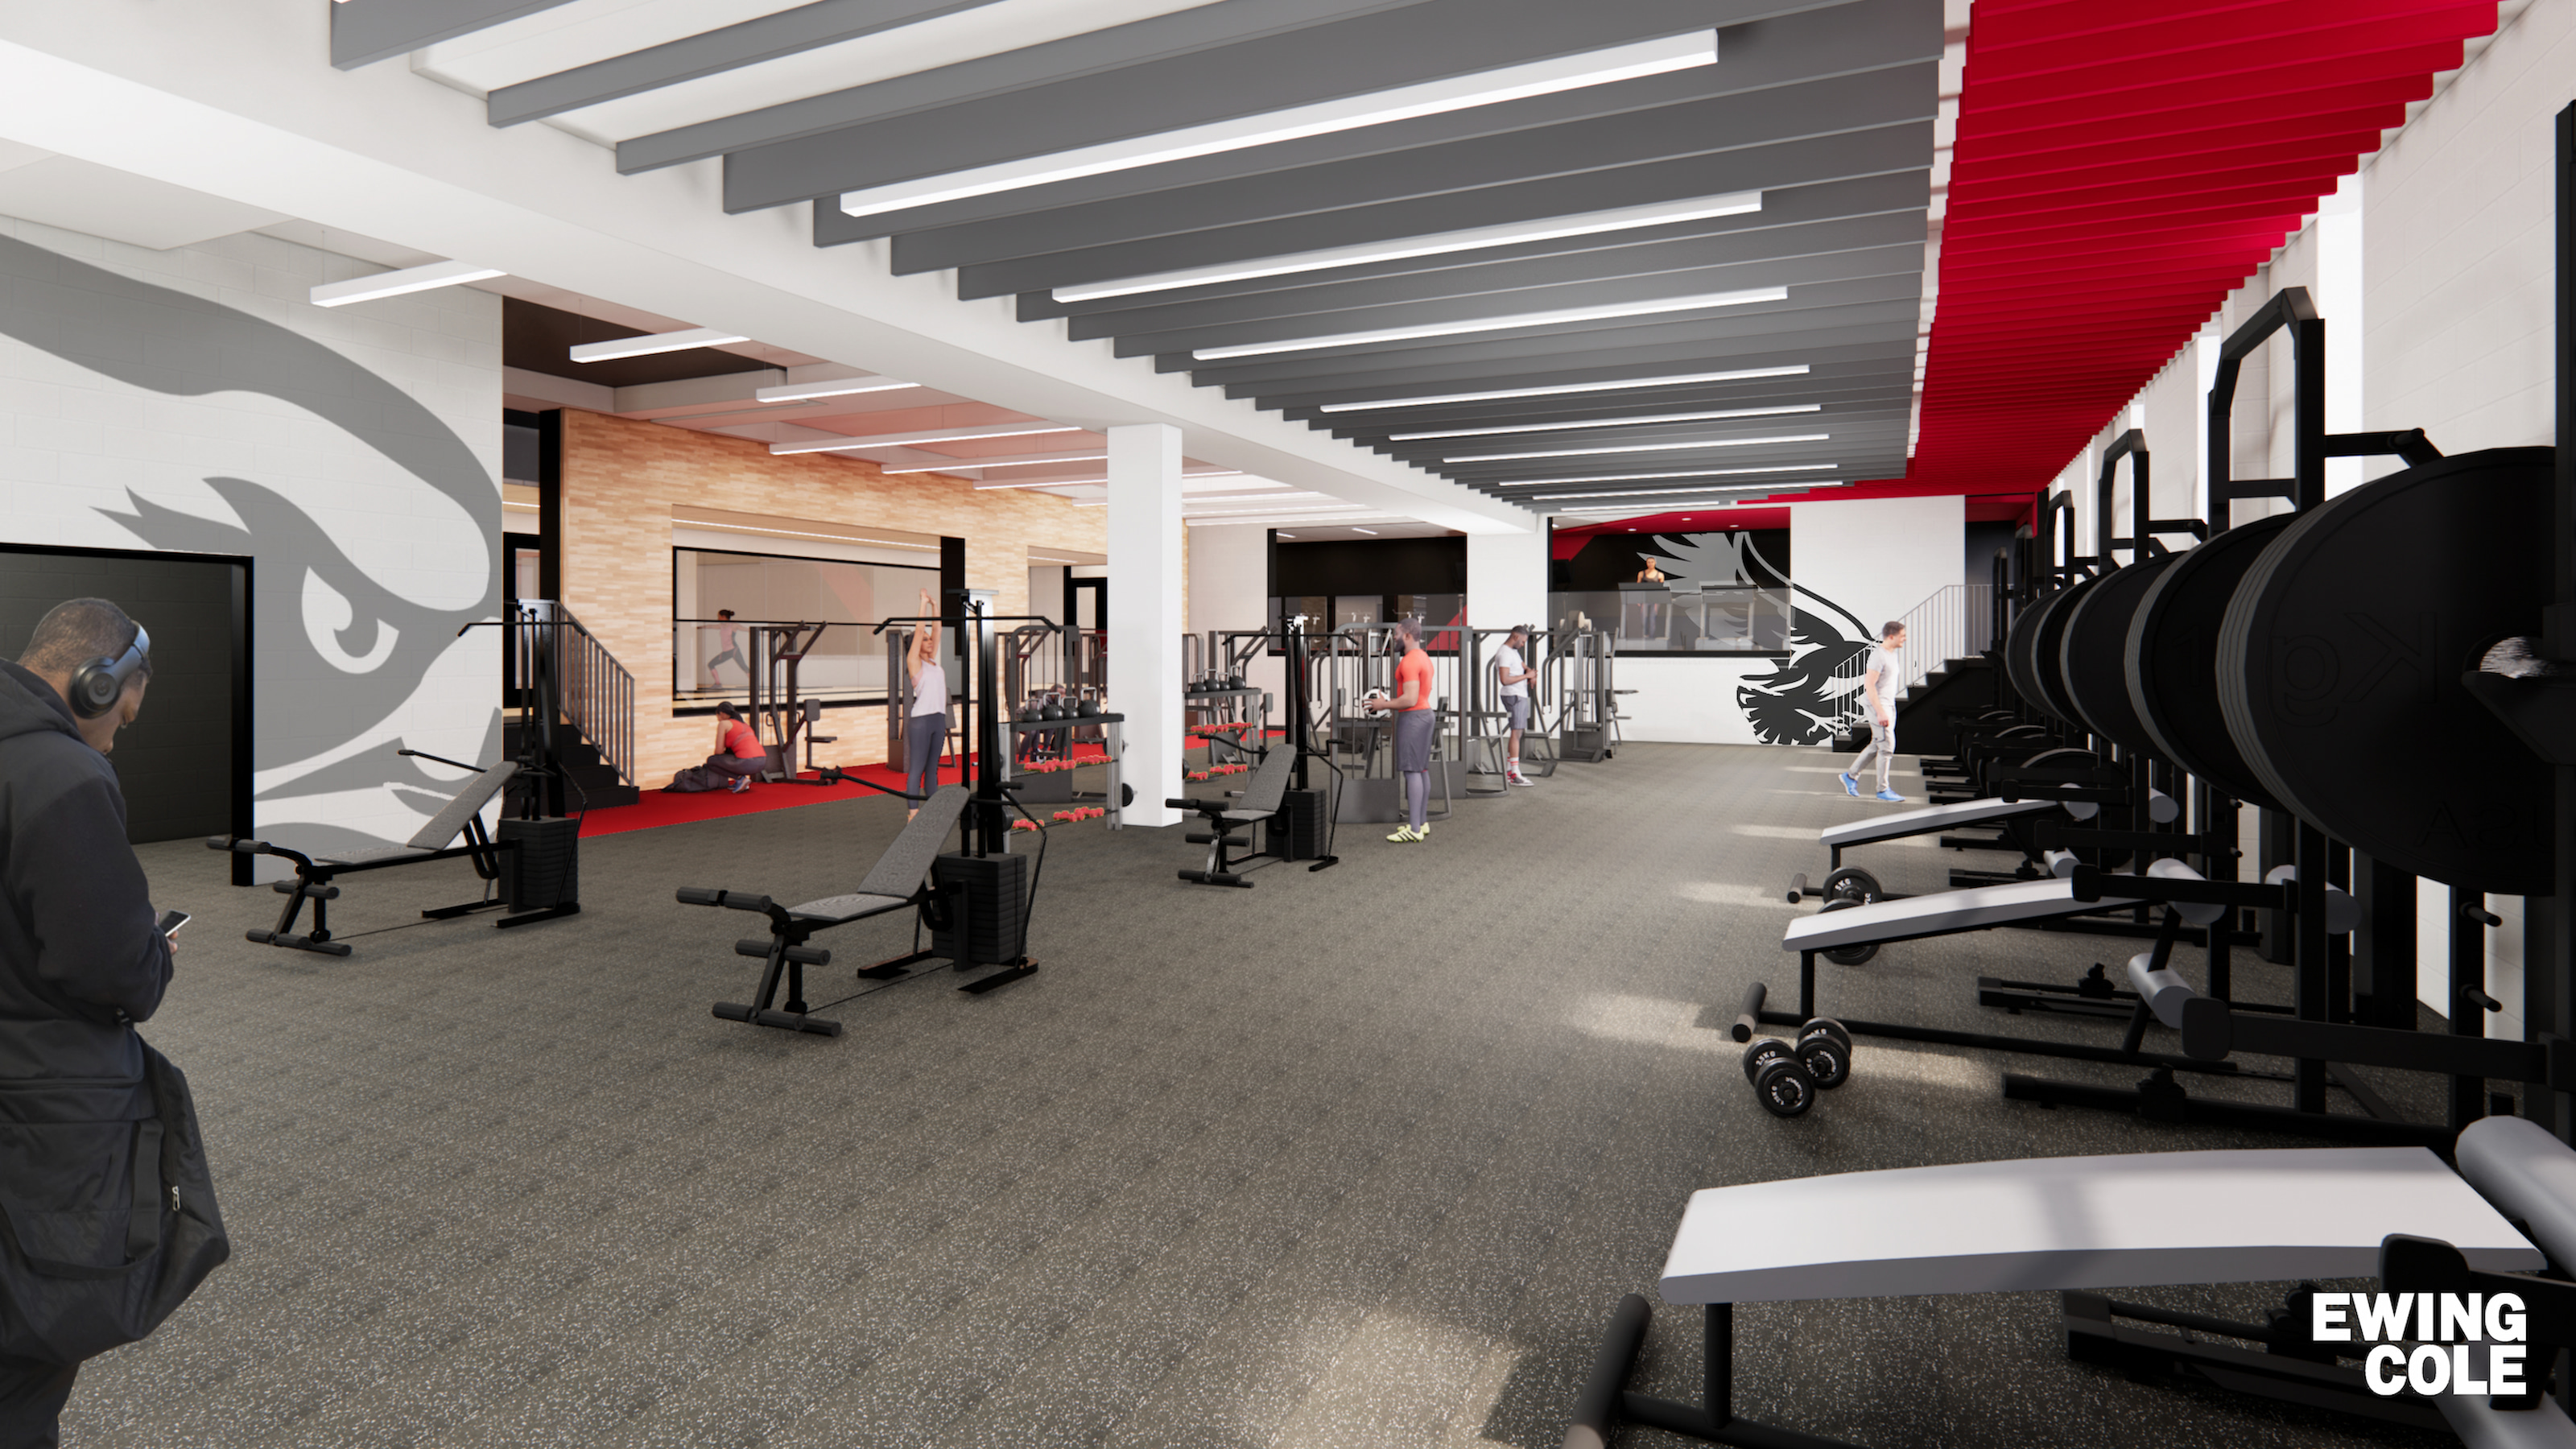 Brand-new equipment will elevate students’ fitness options